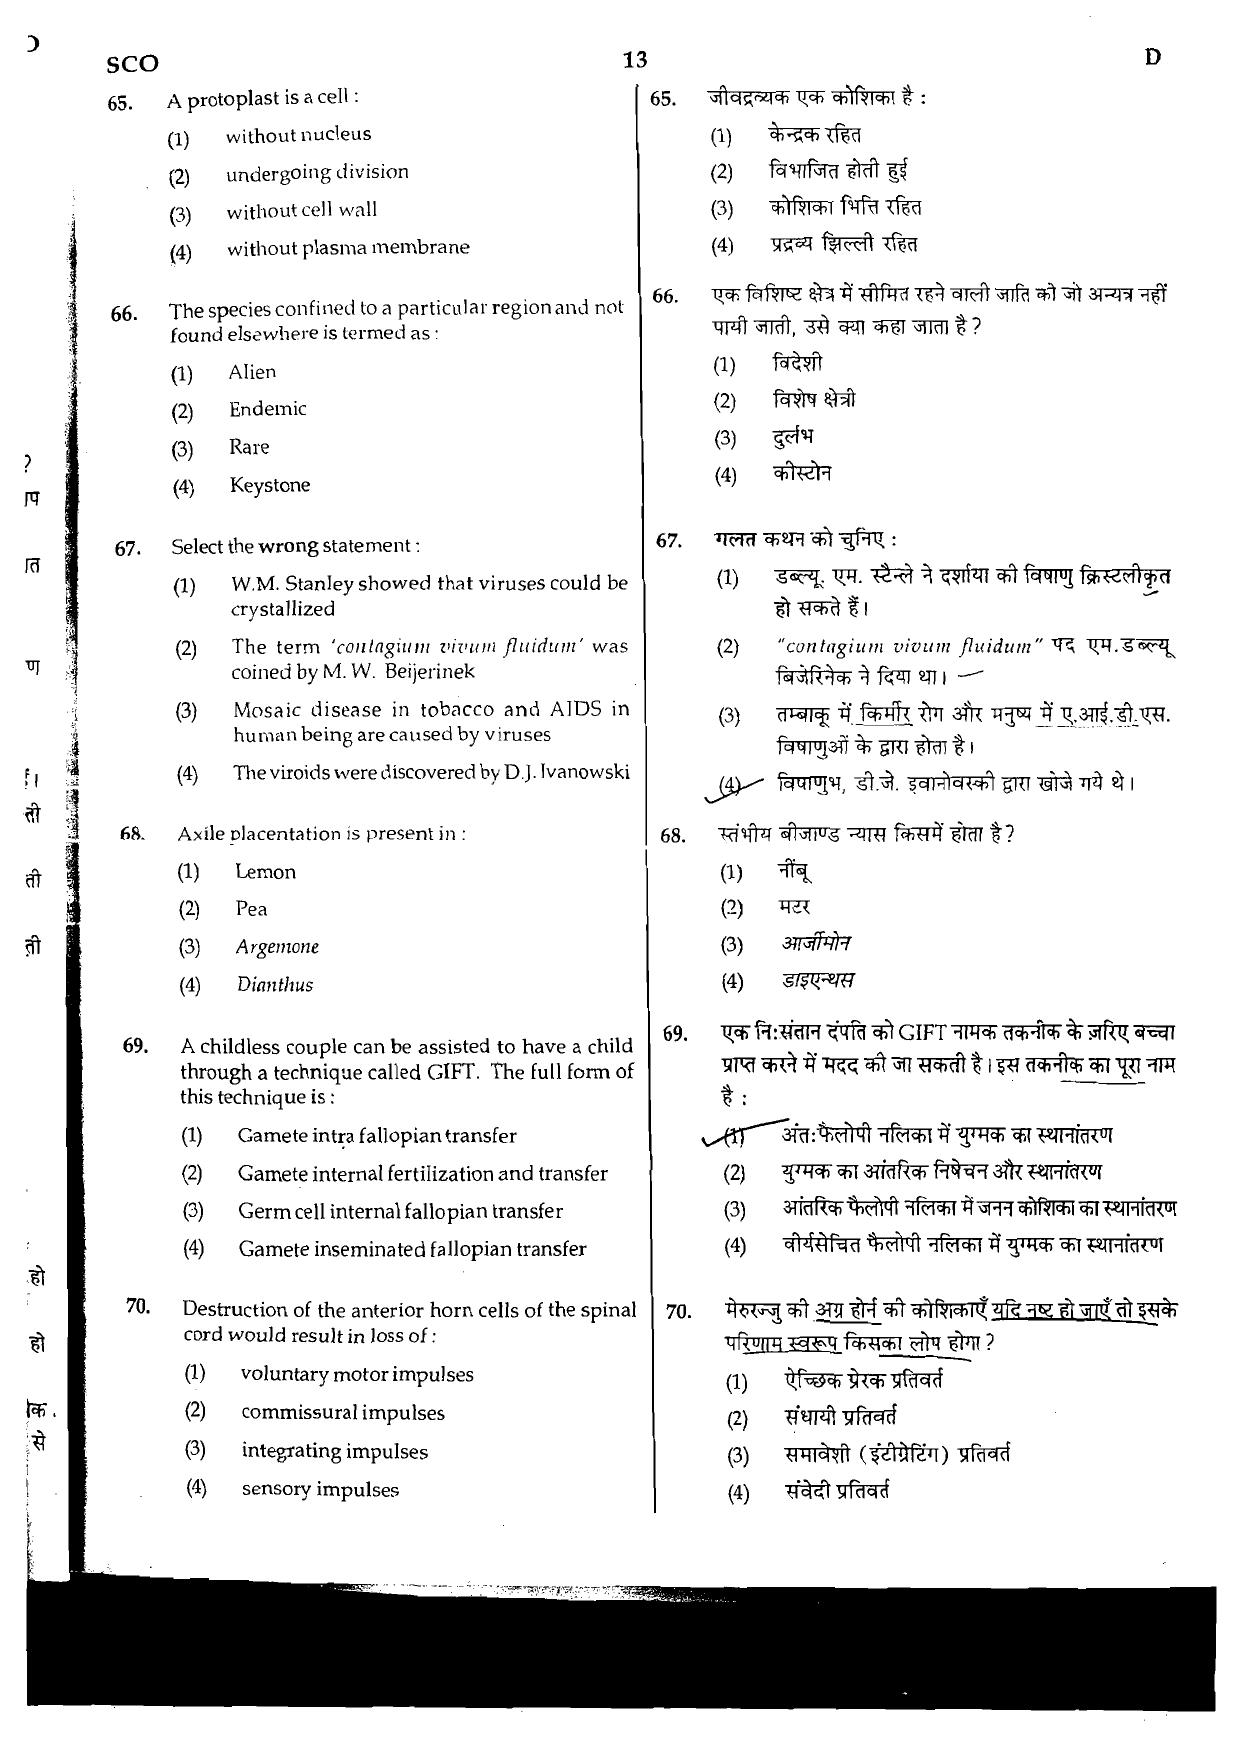 NEET Code D 2015 Question Paper - Page 13